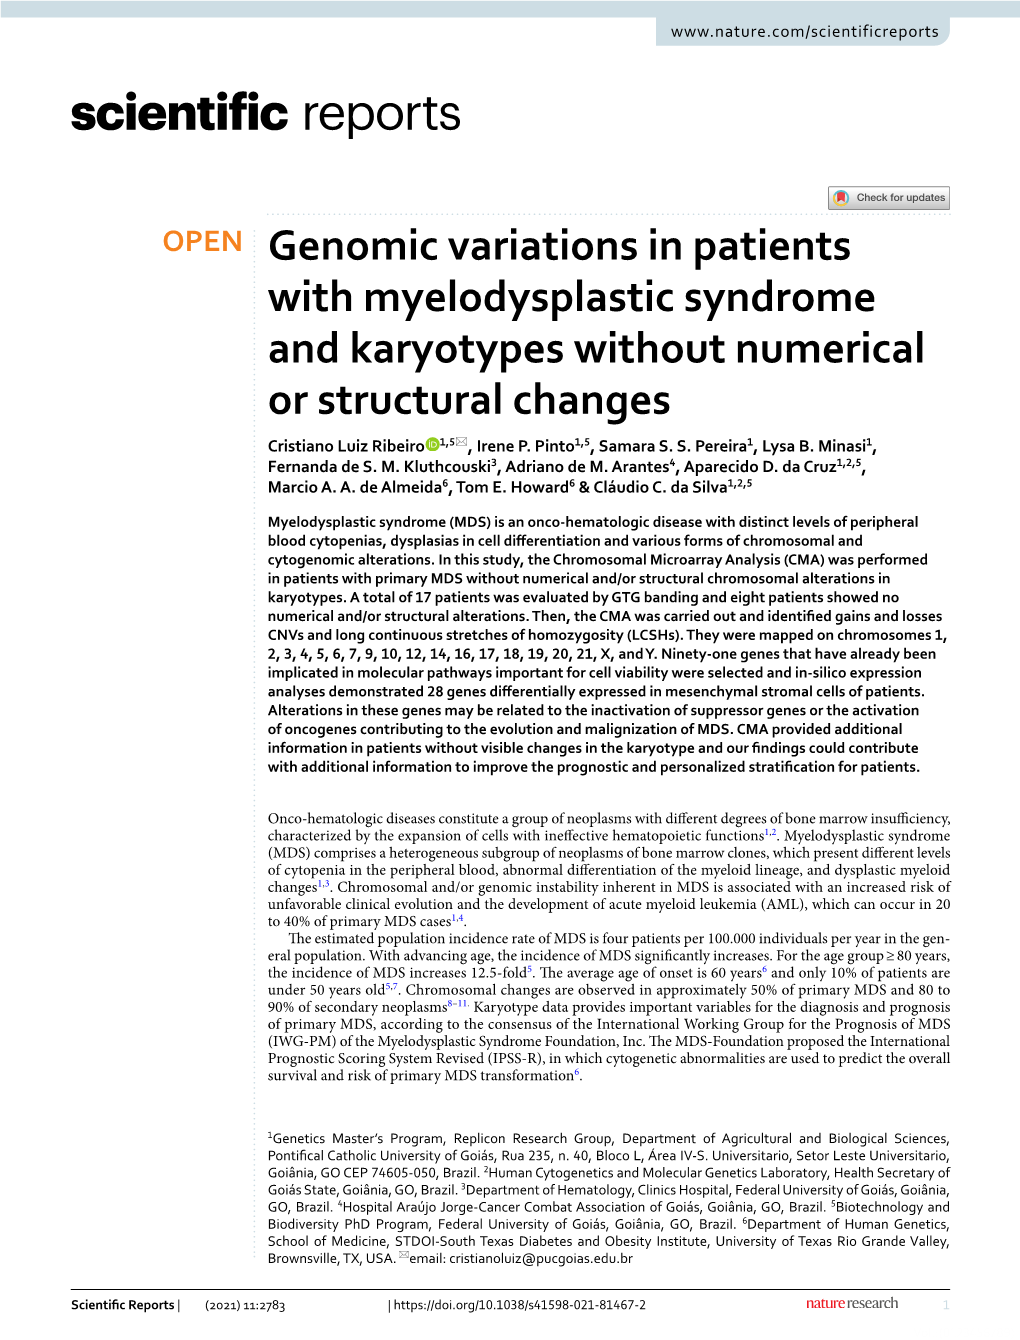 Genomic Variations in Patients with Myelodysplastic Syndrome and Karyotypes Without Numerical Or Structural Changes Cristiano Luiz Ribeiro 1,5*, Irene P